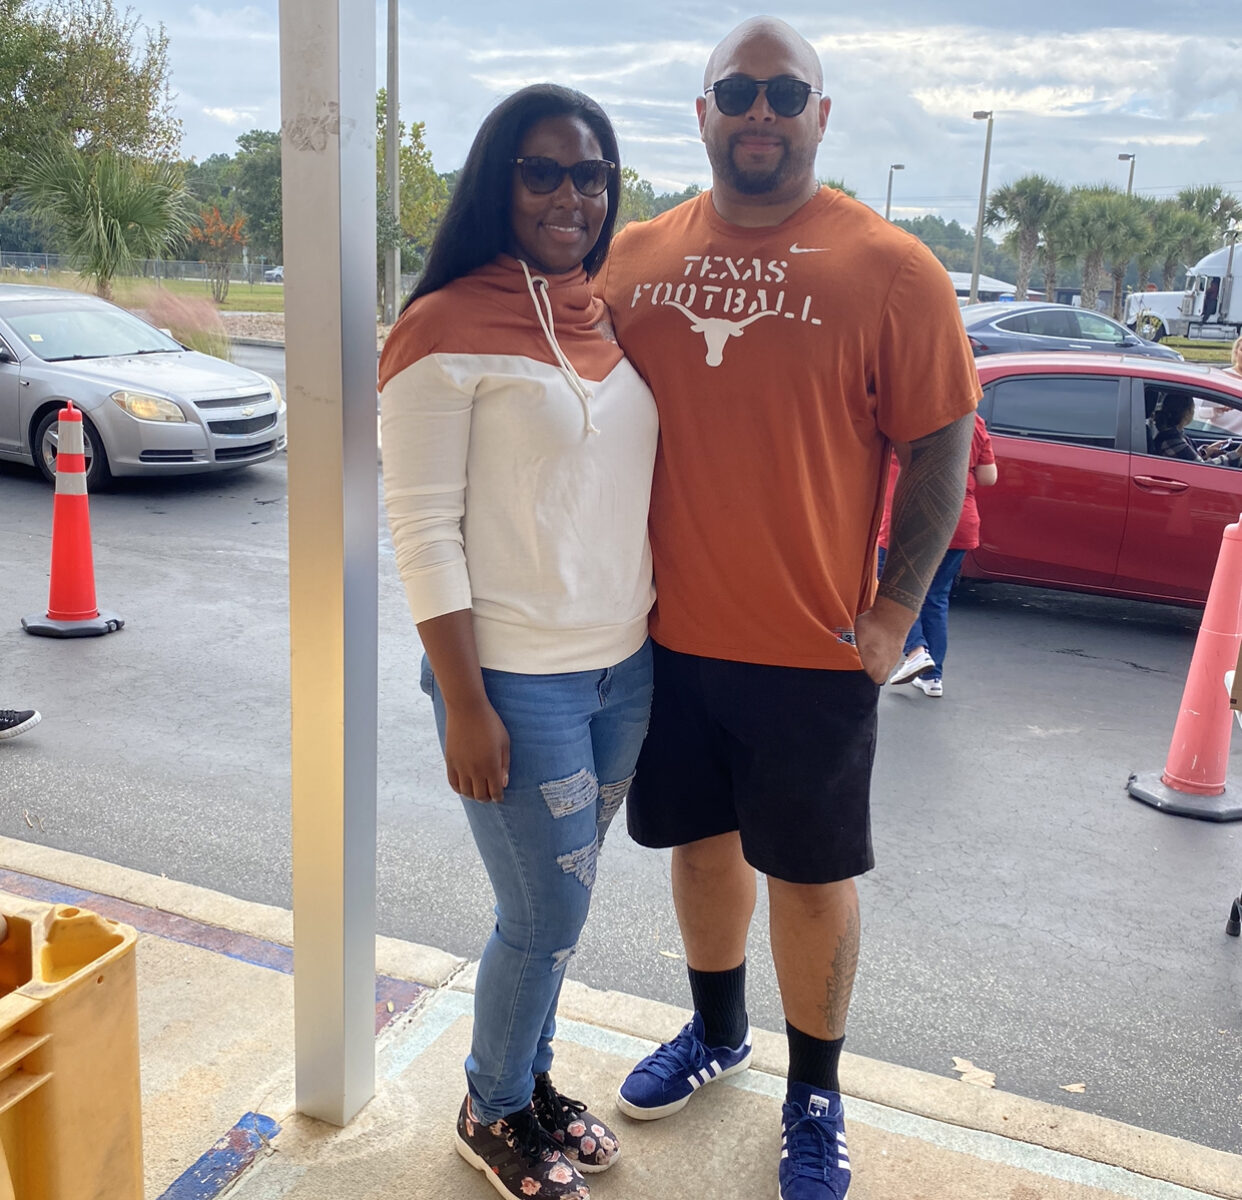 Roy & Wife Share a photo at food drive.